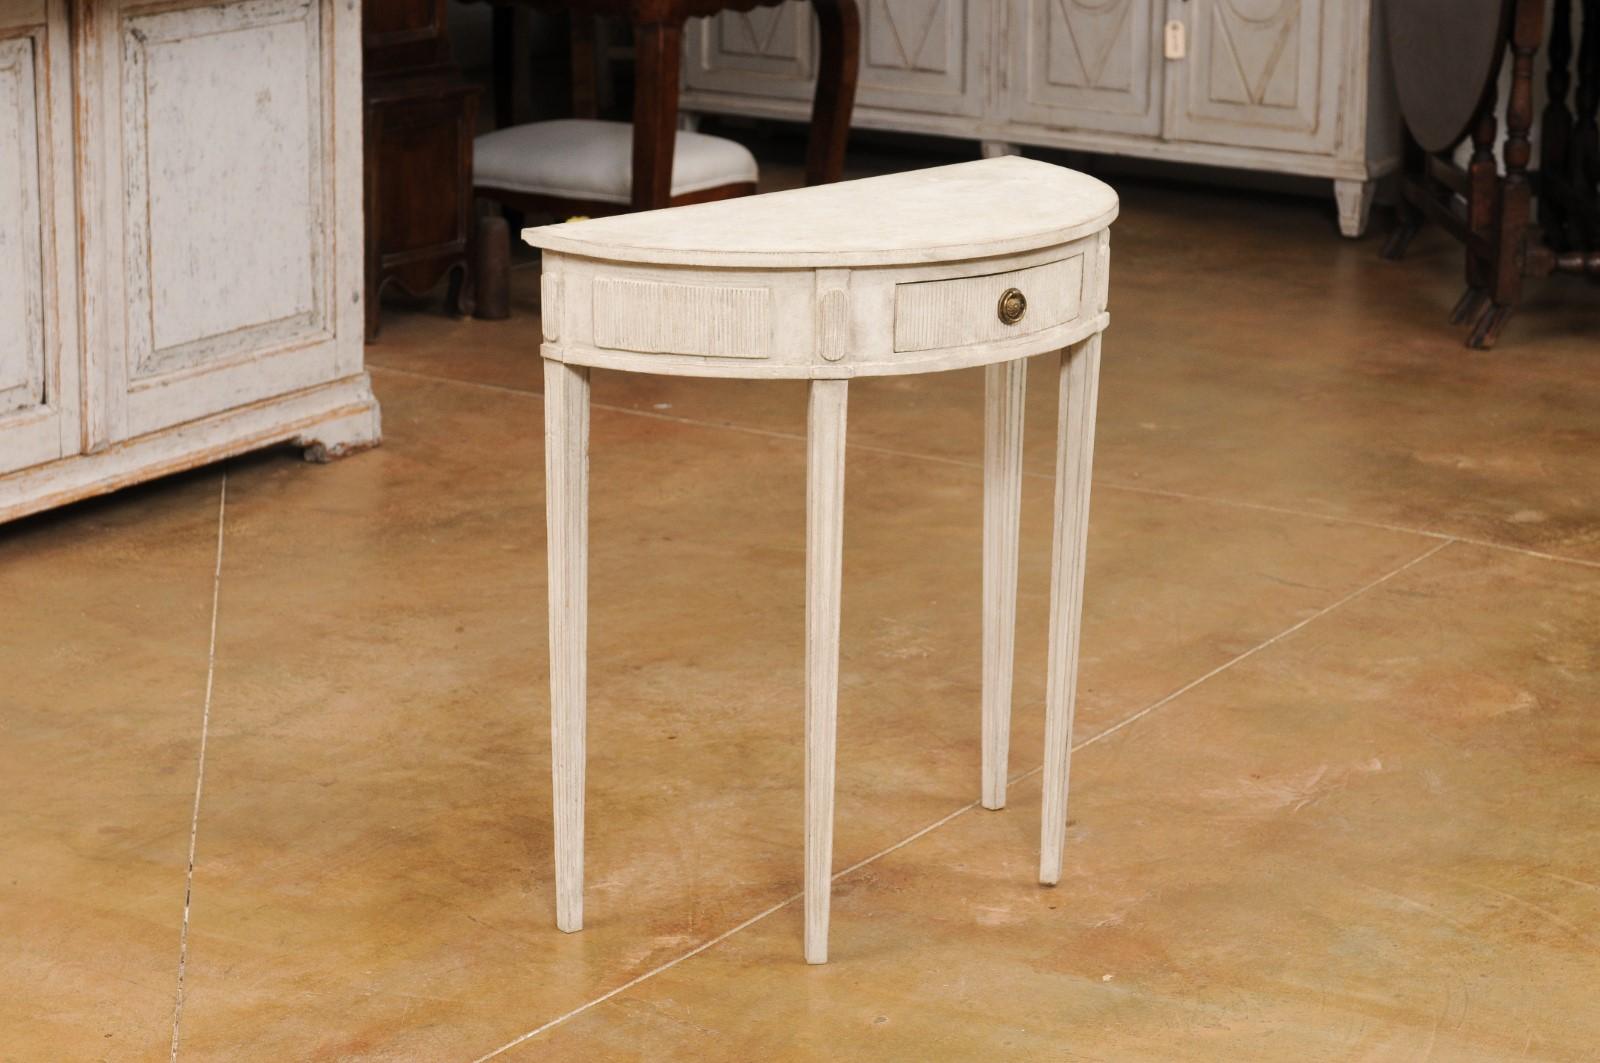 A Swedish neoclassical style painted wood demilune console table from the 20th century with single drawer, carved fluted accents and tapered legs. Introduce an element of timeless elegance to your space with this Swedish neoclassical style demilune